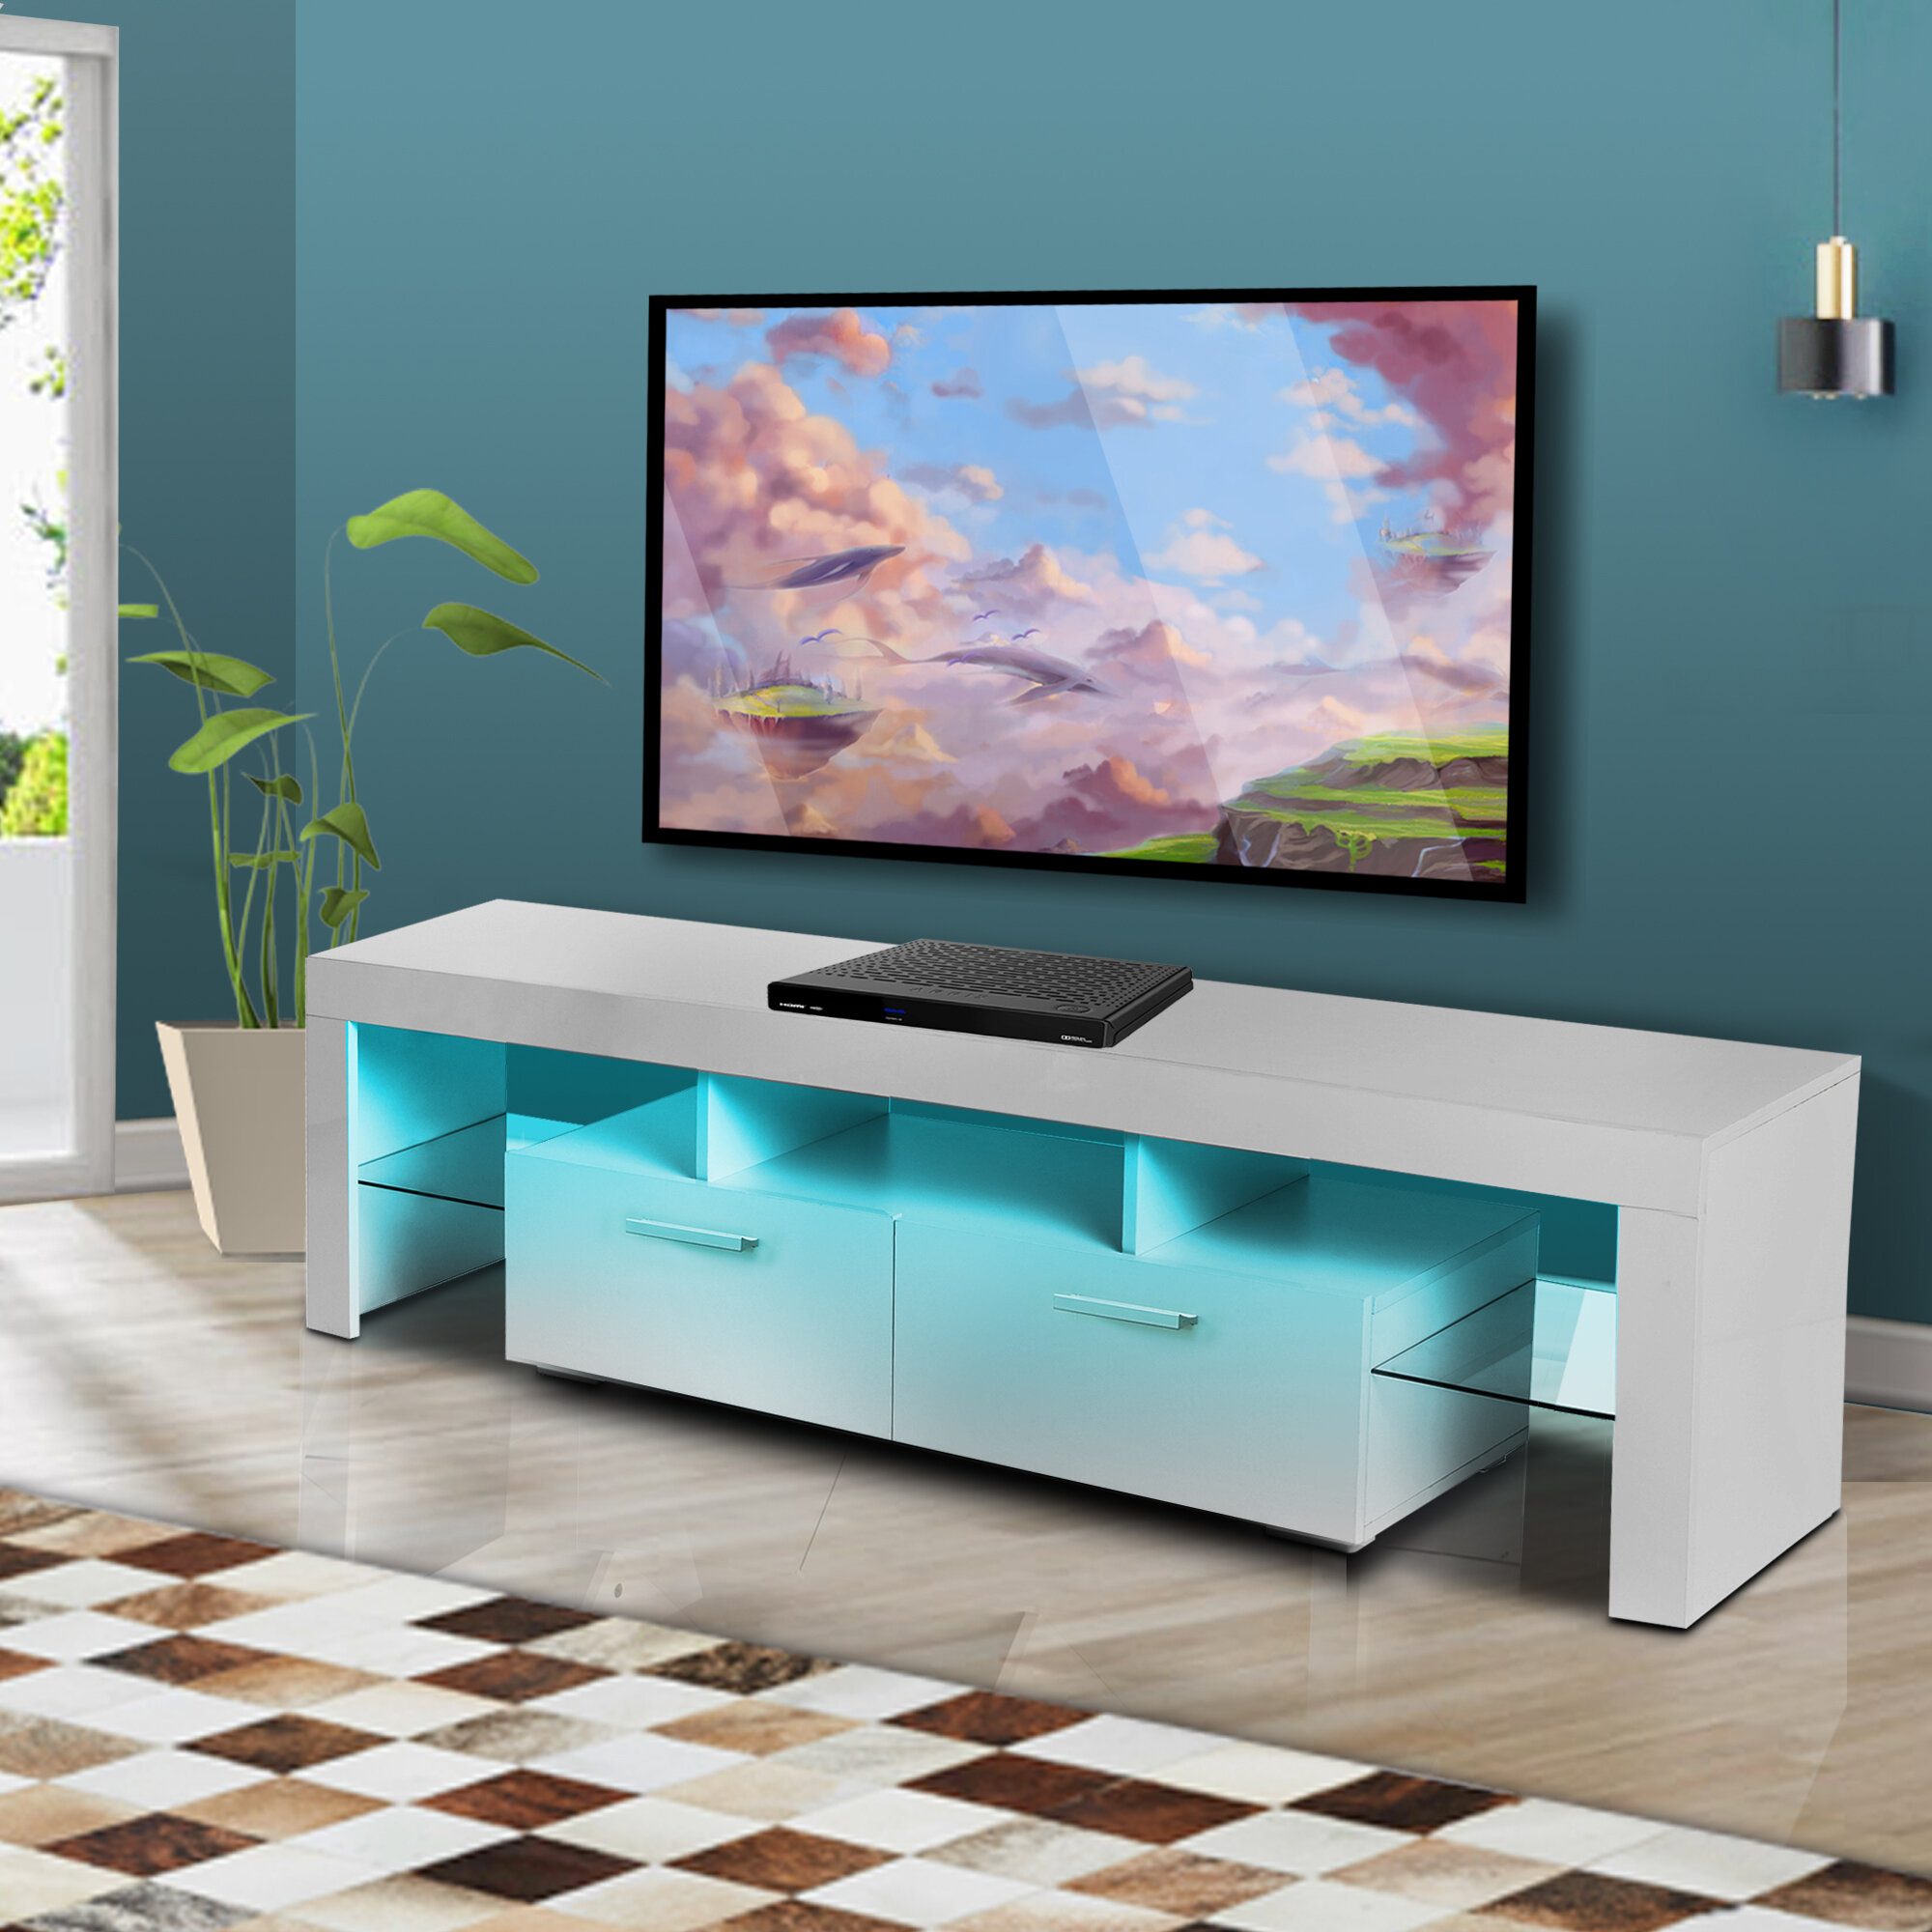 Details about   High Gloss TV Stand Cabinet Wood Living Room Furniture Center Console Cabinet 